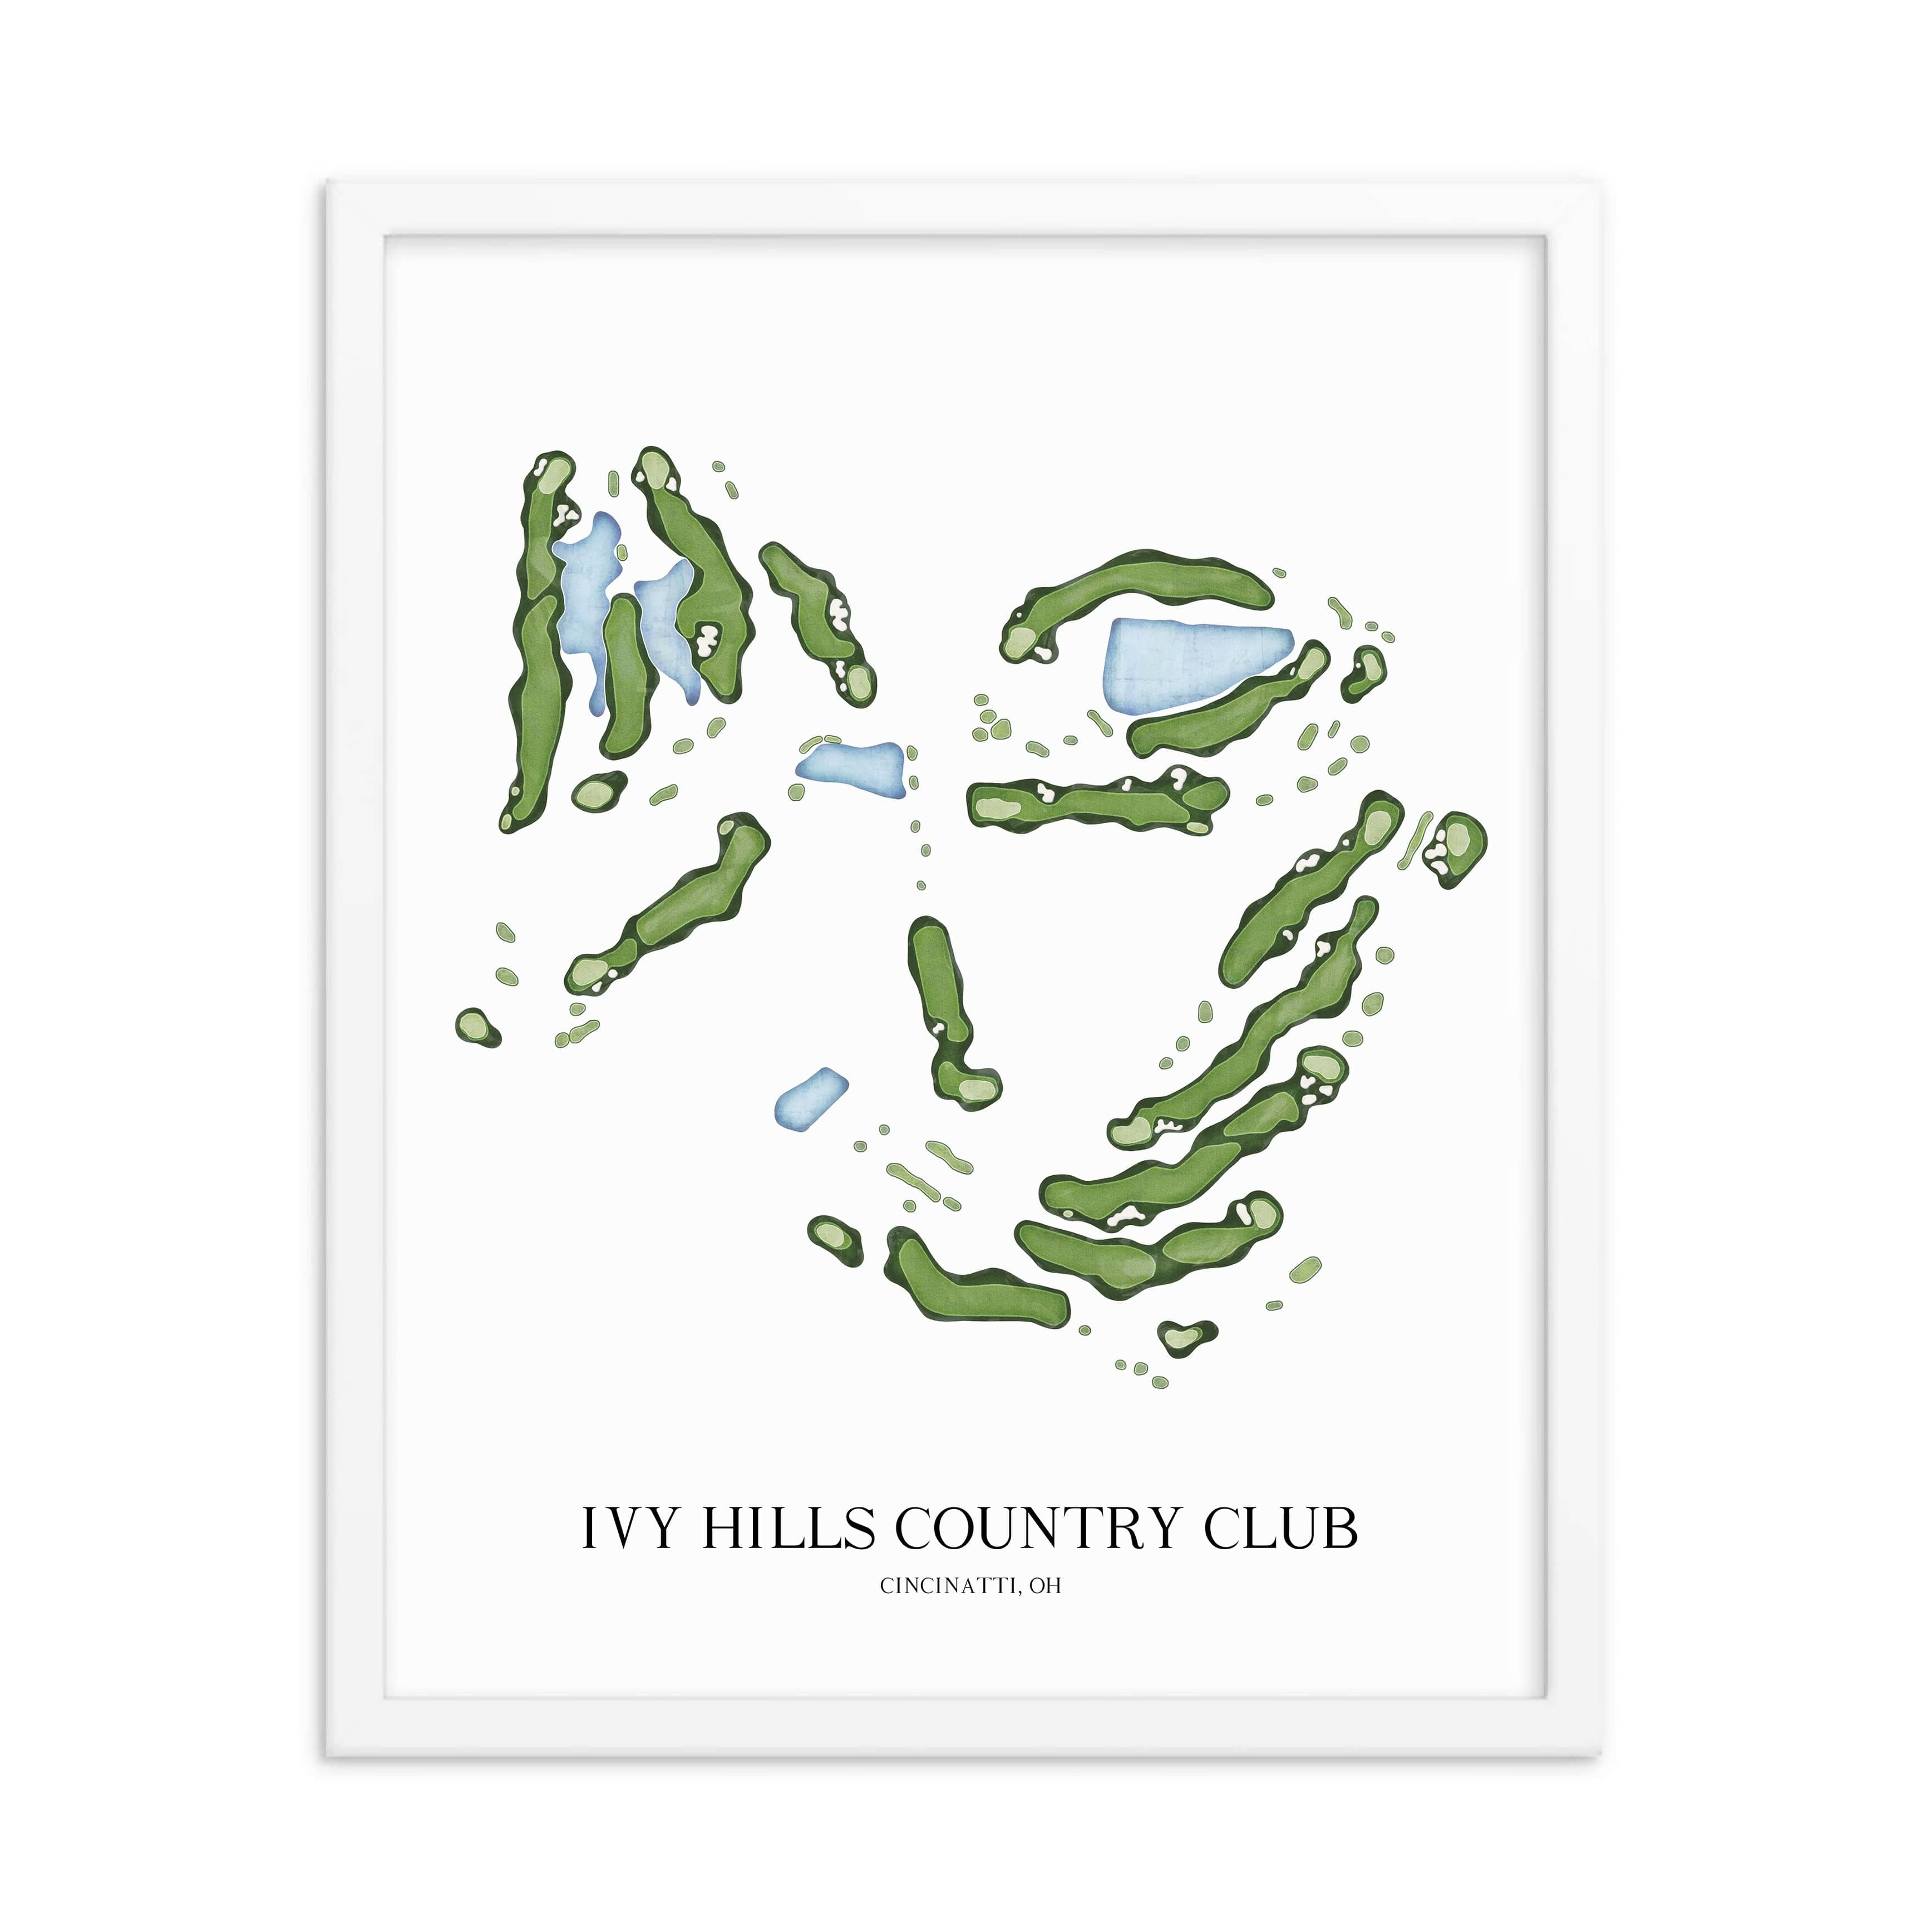 The 19th Hole Golf Shop - Golf Course Prints -  Ivy Hills Country Club Golf Course Map